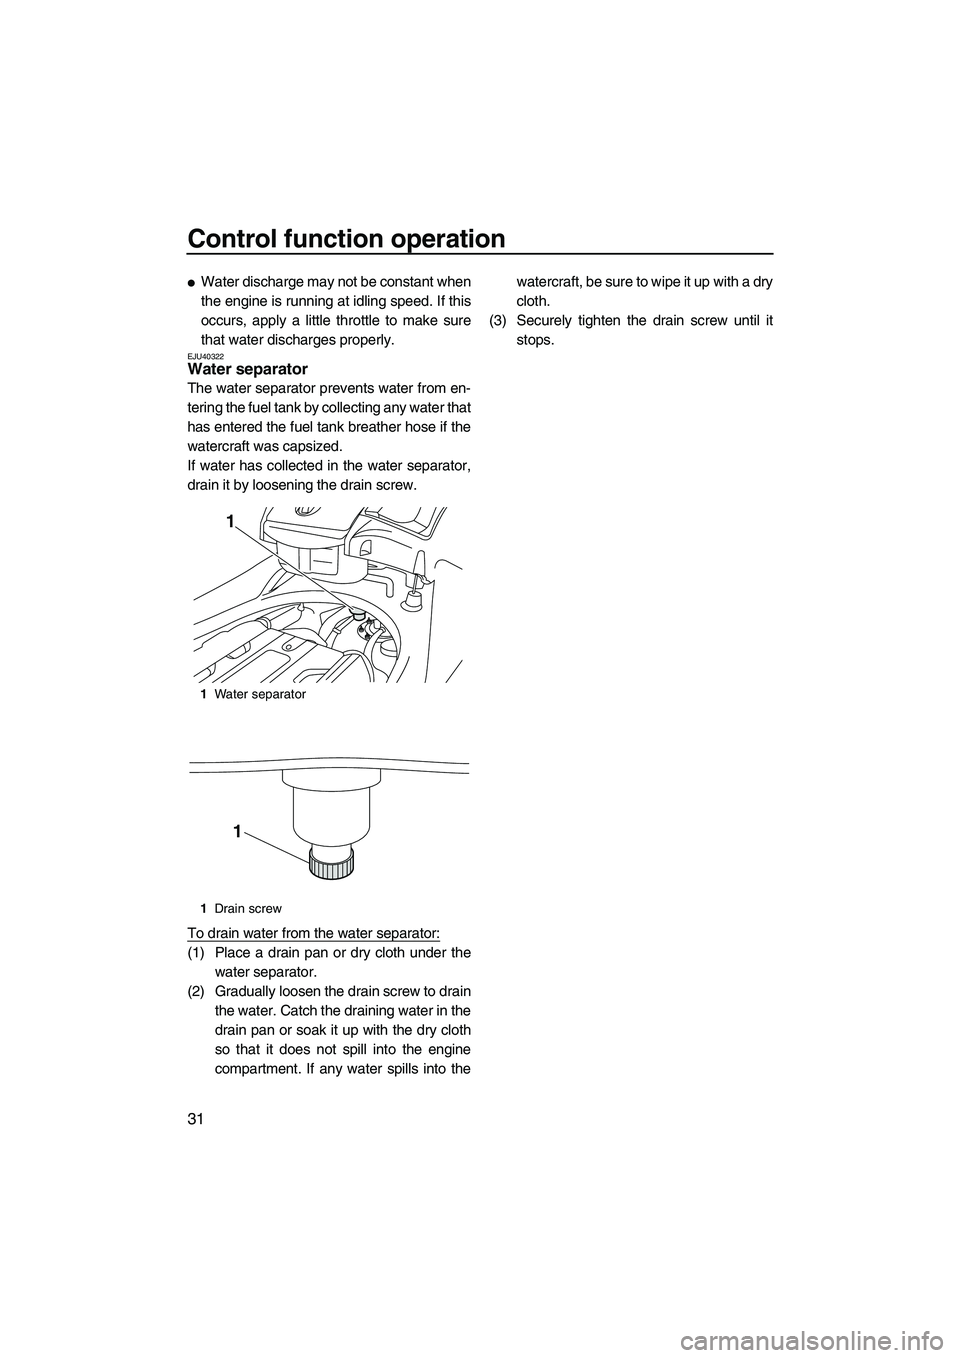 YAMAHA SVHO 2010 Owners Guide Control function operation
31
Water discharge may not be constant when
the engine is running at idling speed. If this
occurs, apply a little throttle to make sure
that water discharges properly.
EJU4